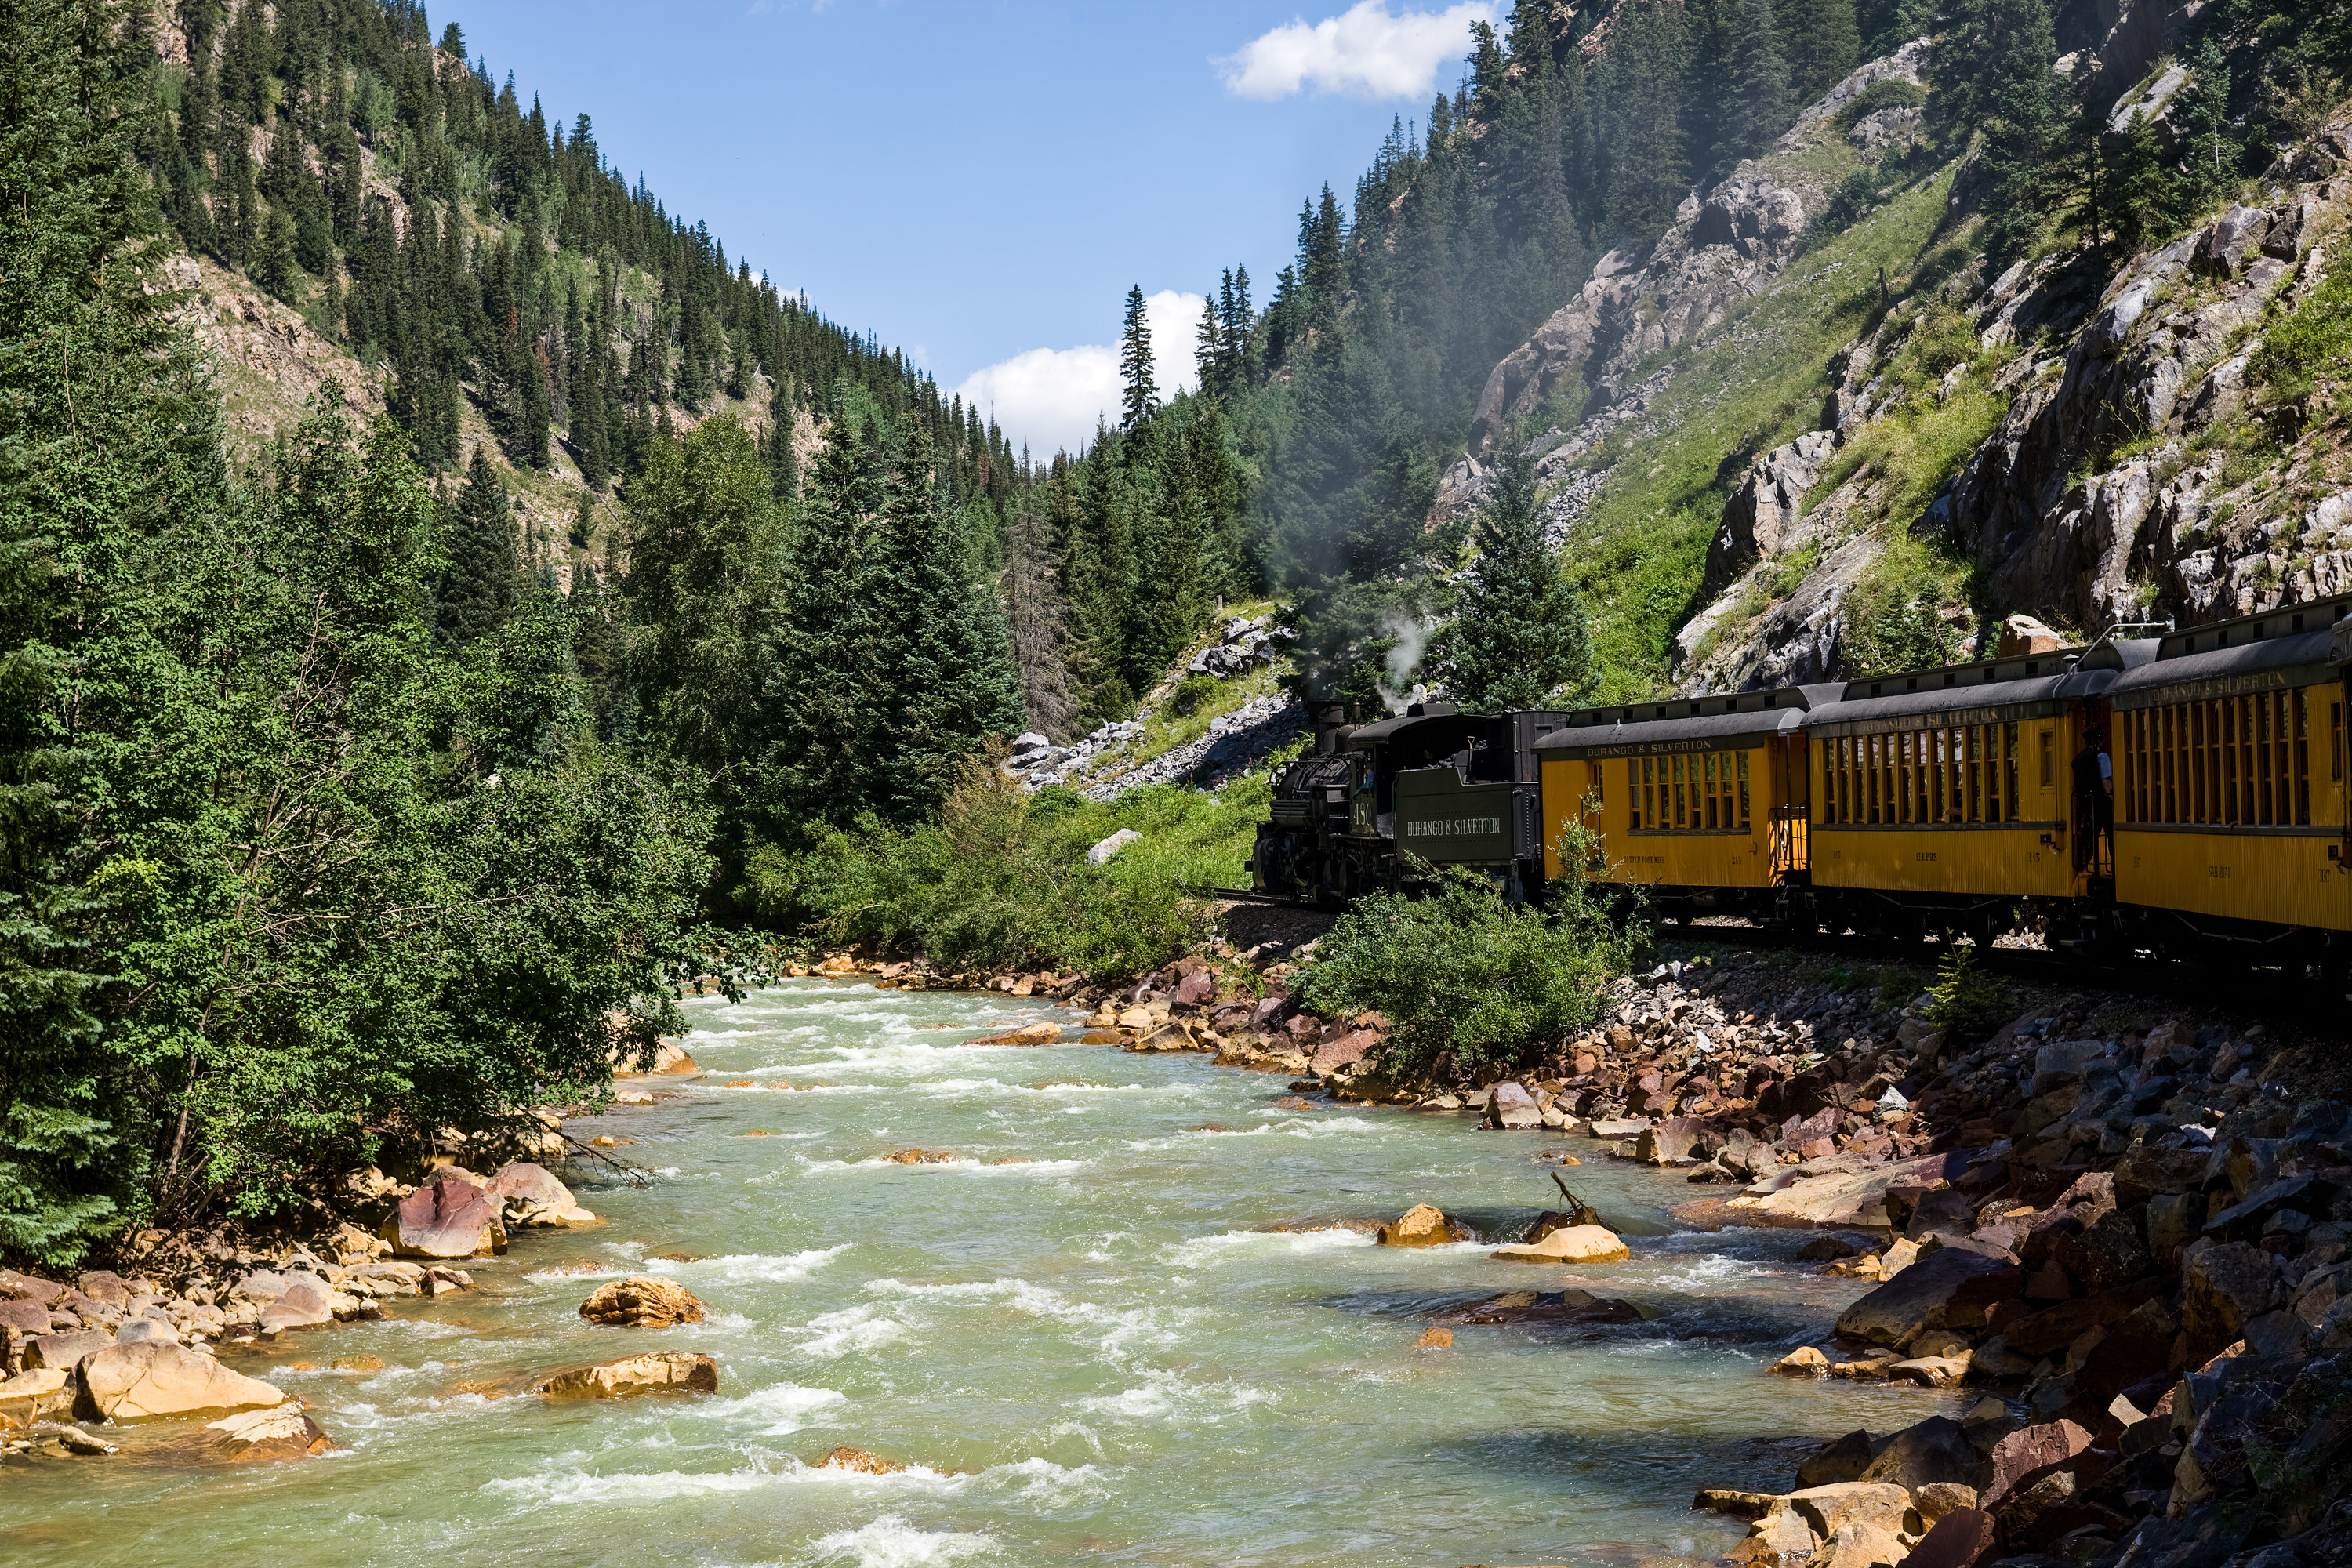 A train passes by a river in the mountains